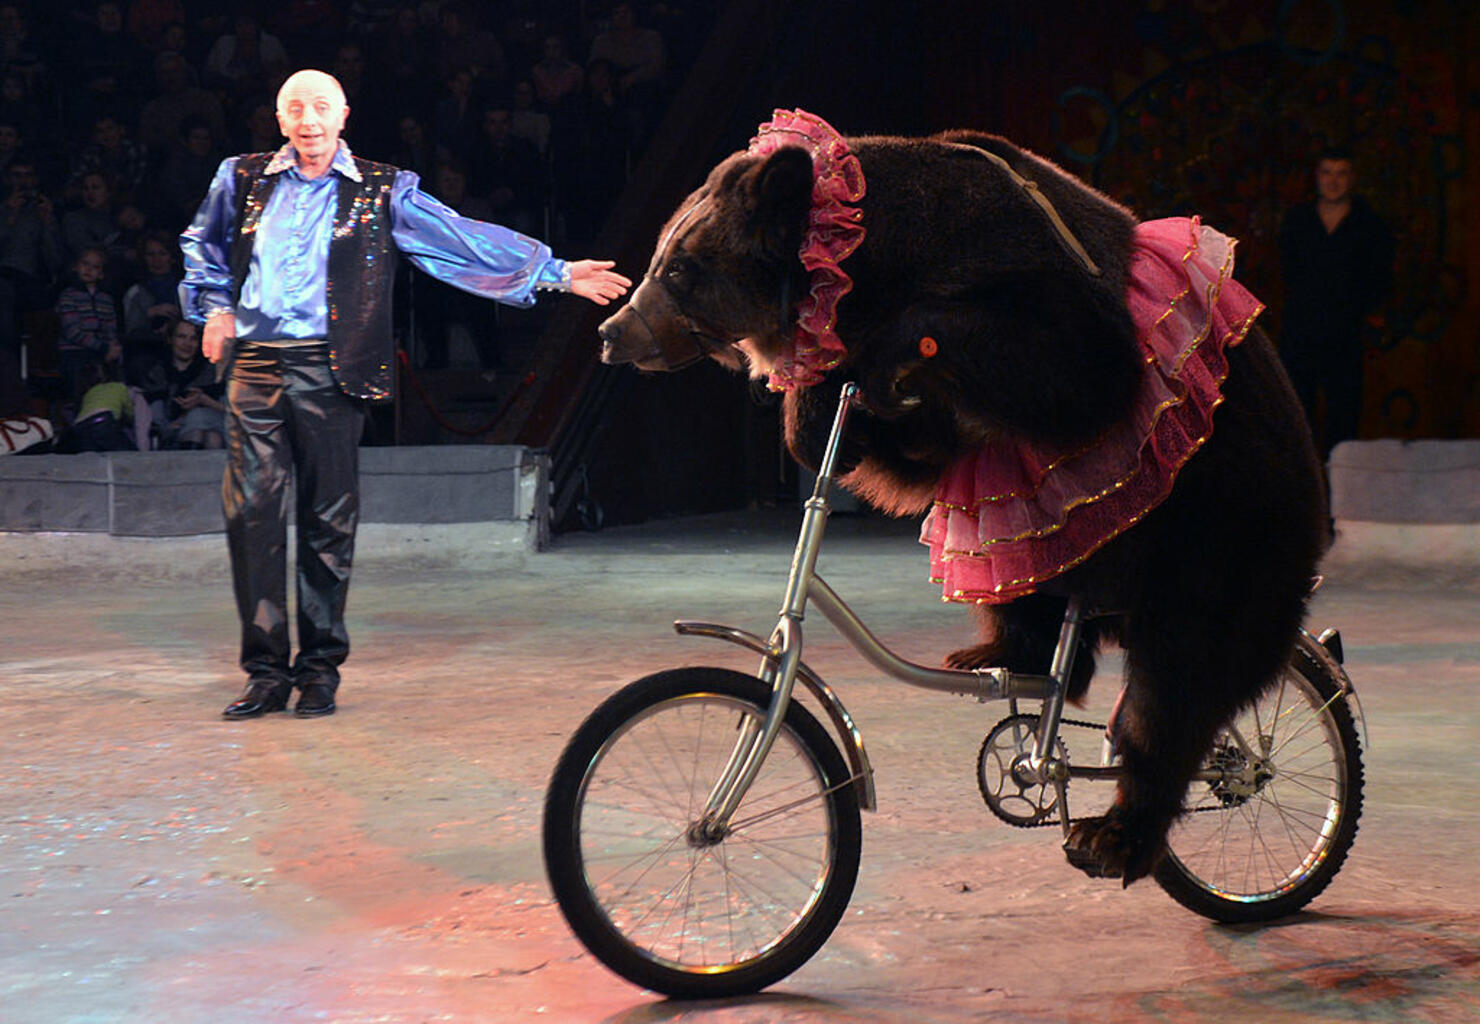 A Performing Bear Has Had Enough of Being Dressed up Like a Jackass! |  iHeart